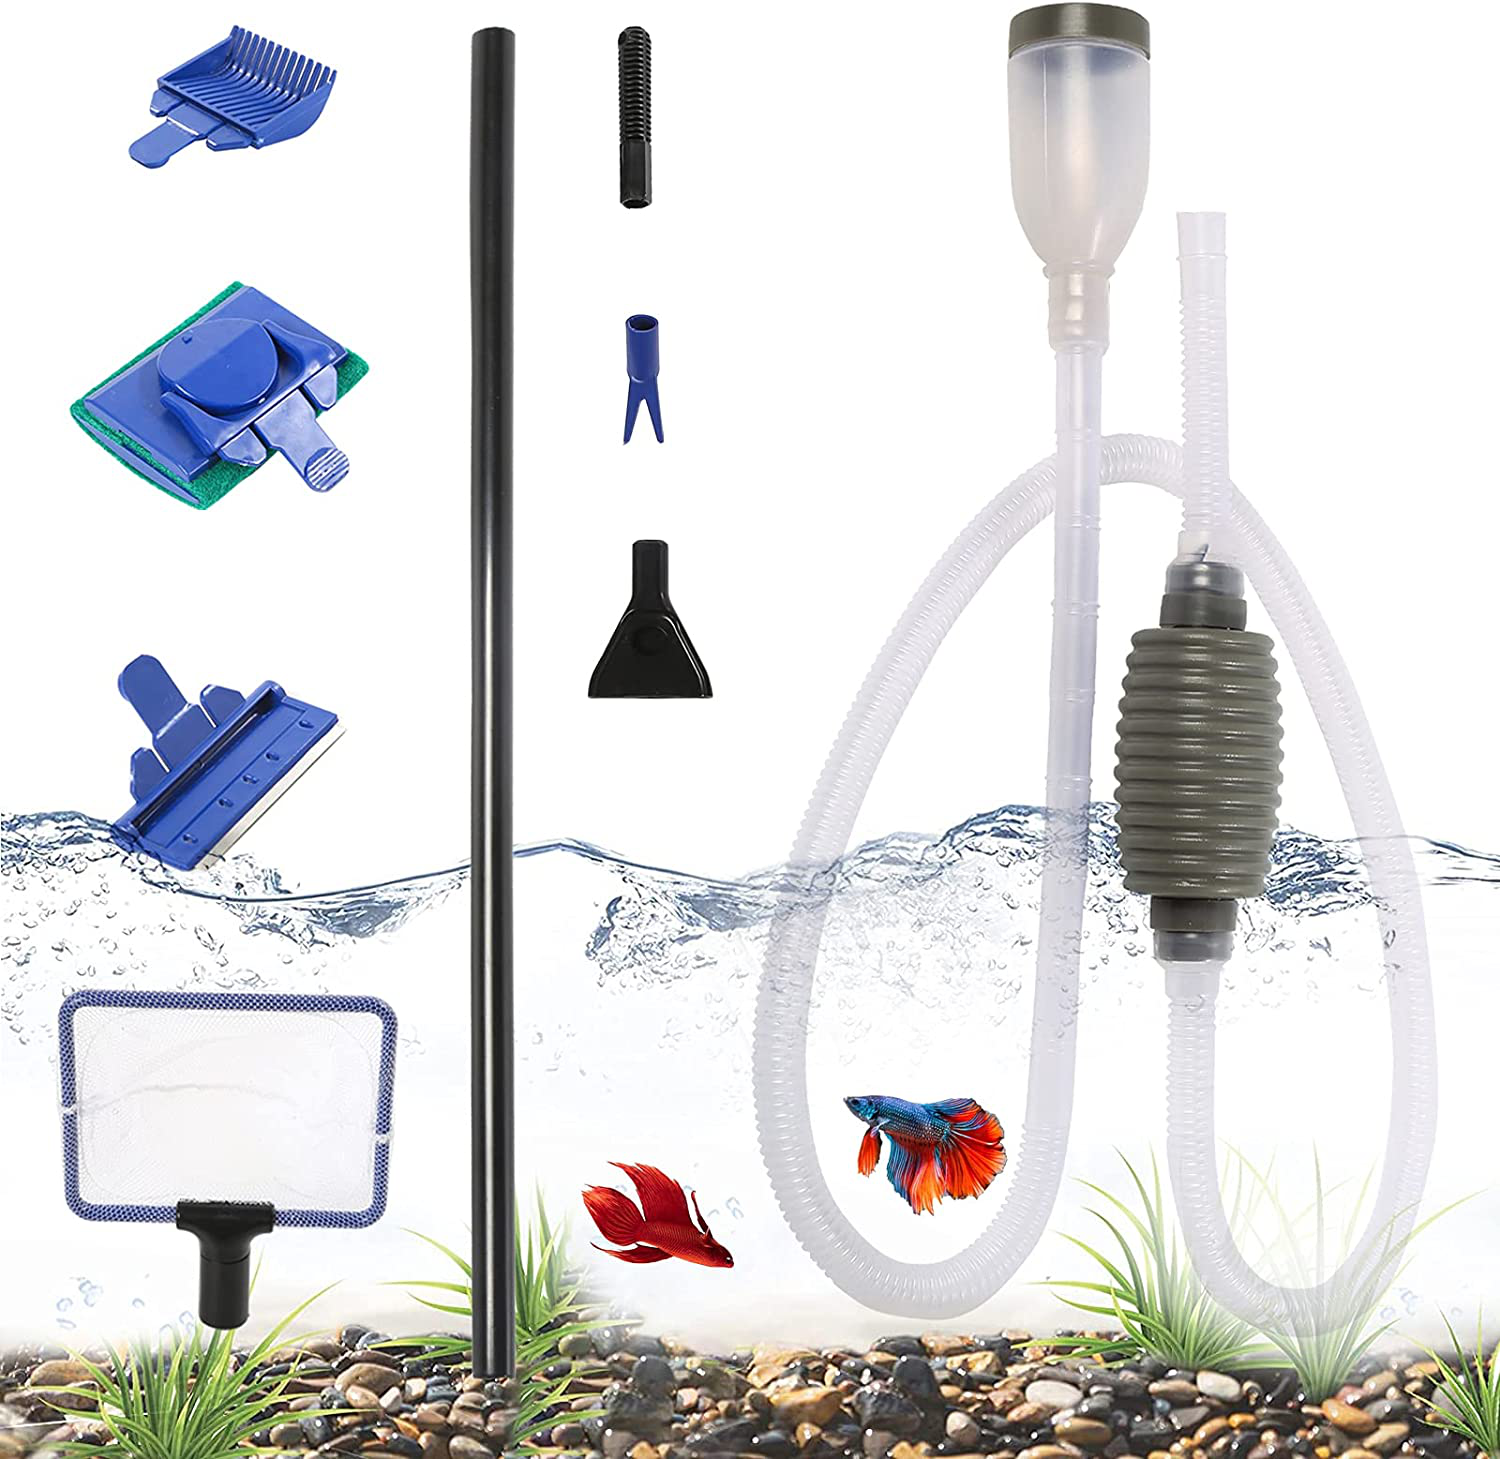 5 in 1 Aquarium Fish Tank Cleaning Tools Kit Aquarium Gravel Cleaner Siphon Fish  Tank Cleaner Water Changer with Dropper Waste Cleaner Algae Scraper D